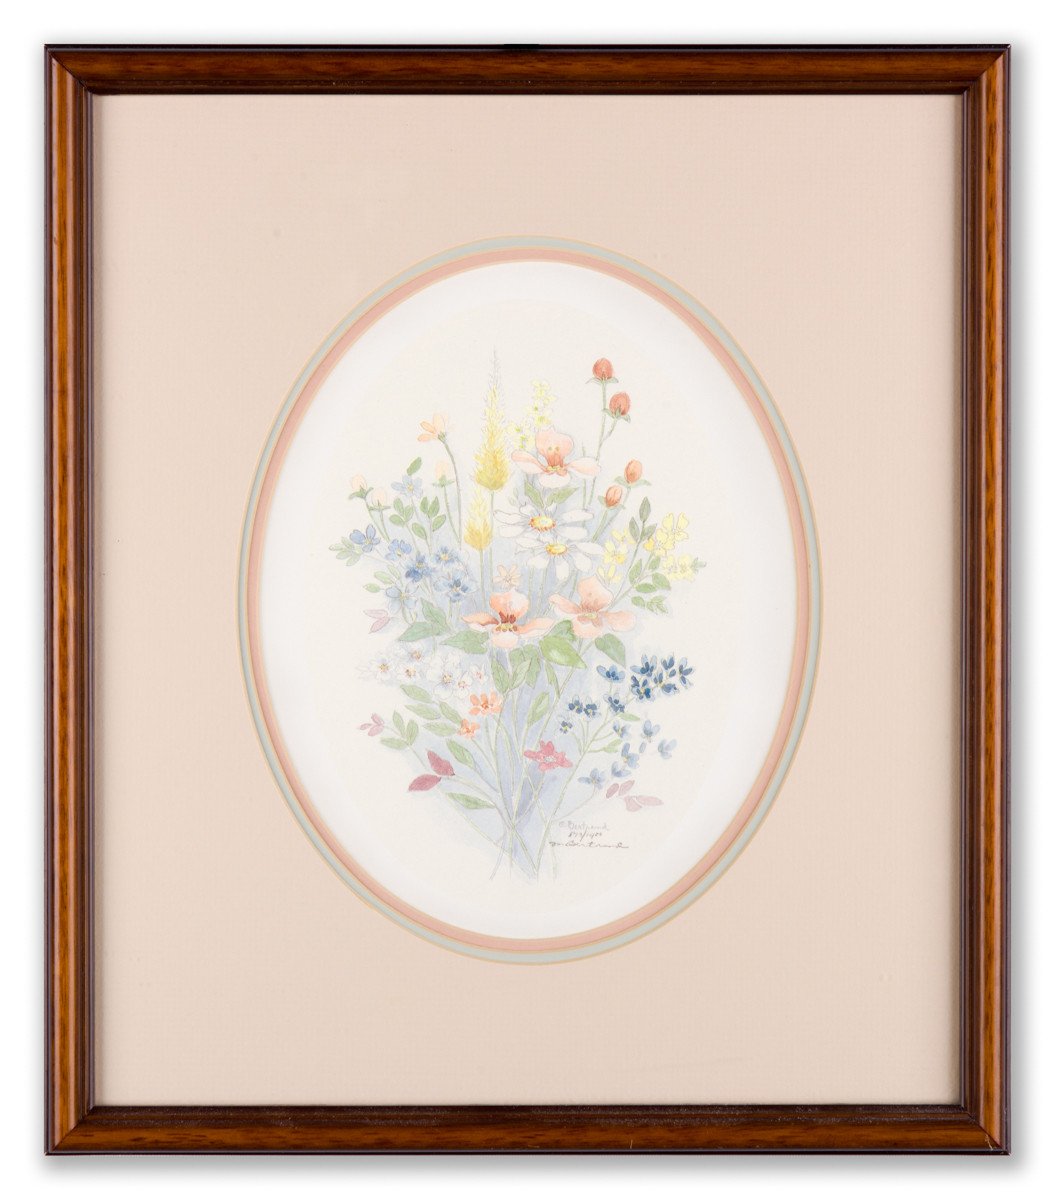 Flowers #2 by Mary Vincent Bertrand (signed lithograph) - Framed Art